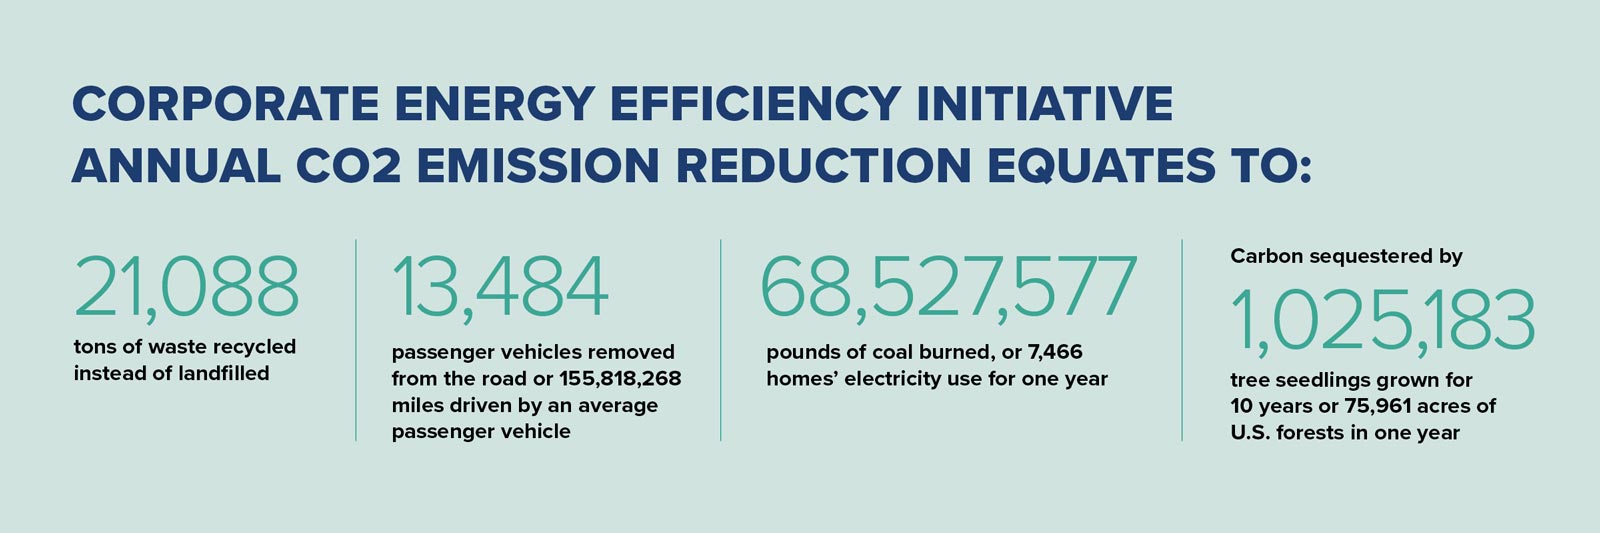 Annual CO2 Emissions Reduction